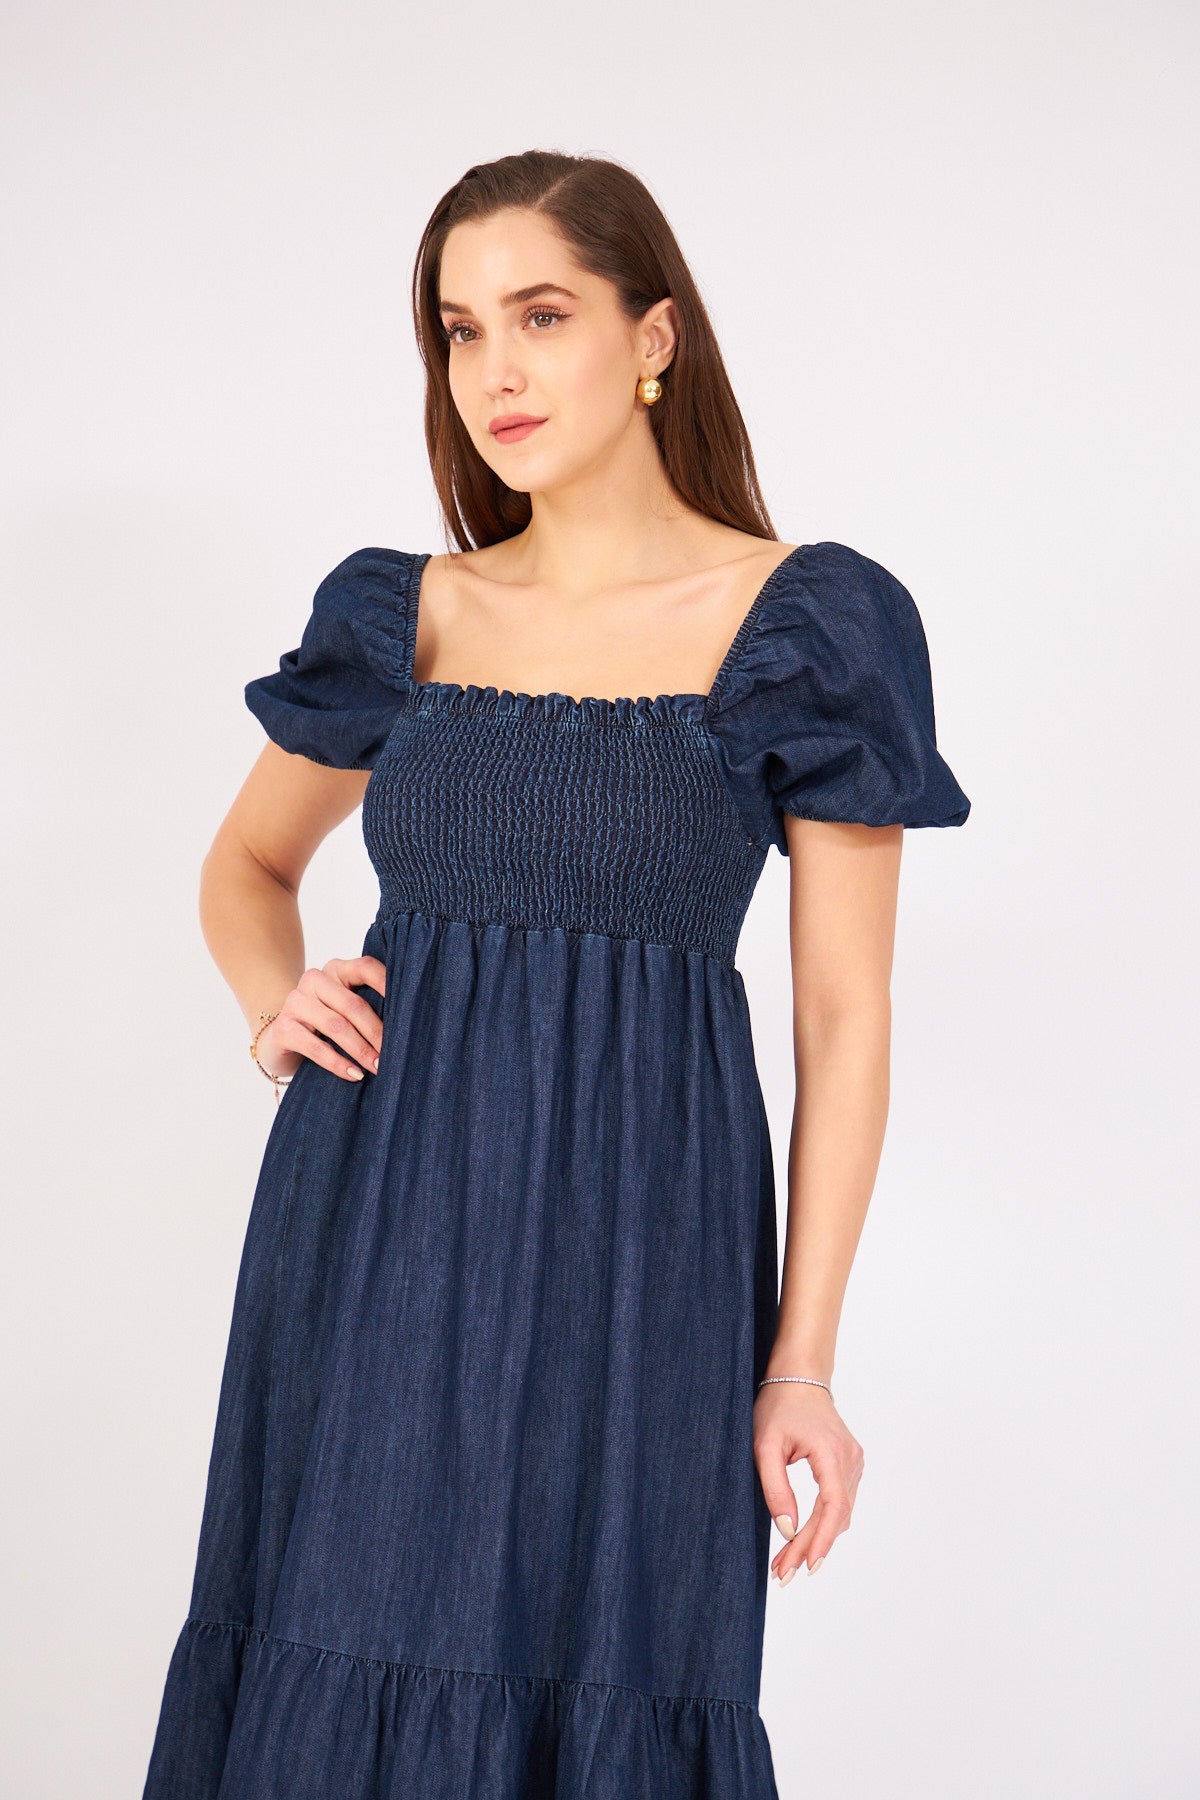 BLUE JEANS CHEST TIPPED DRESS - Lebbse